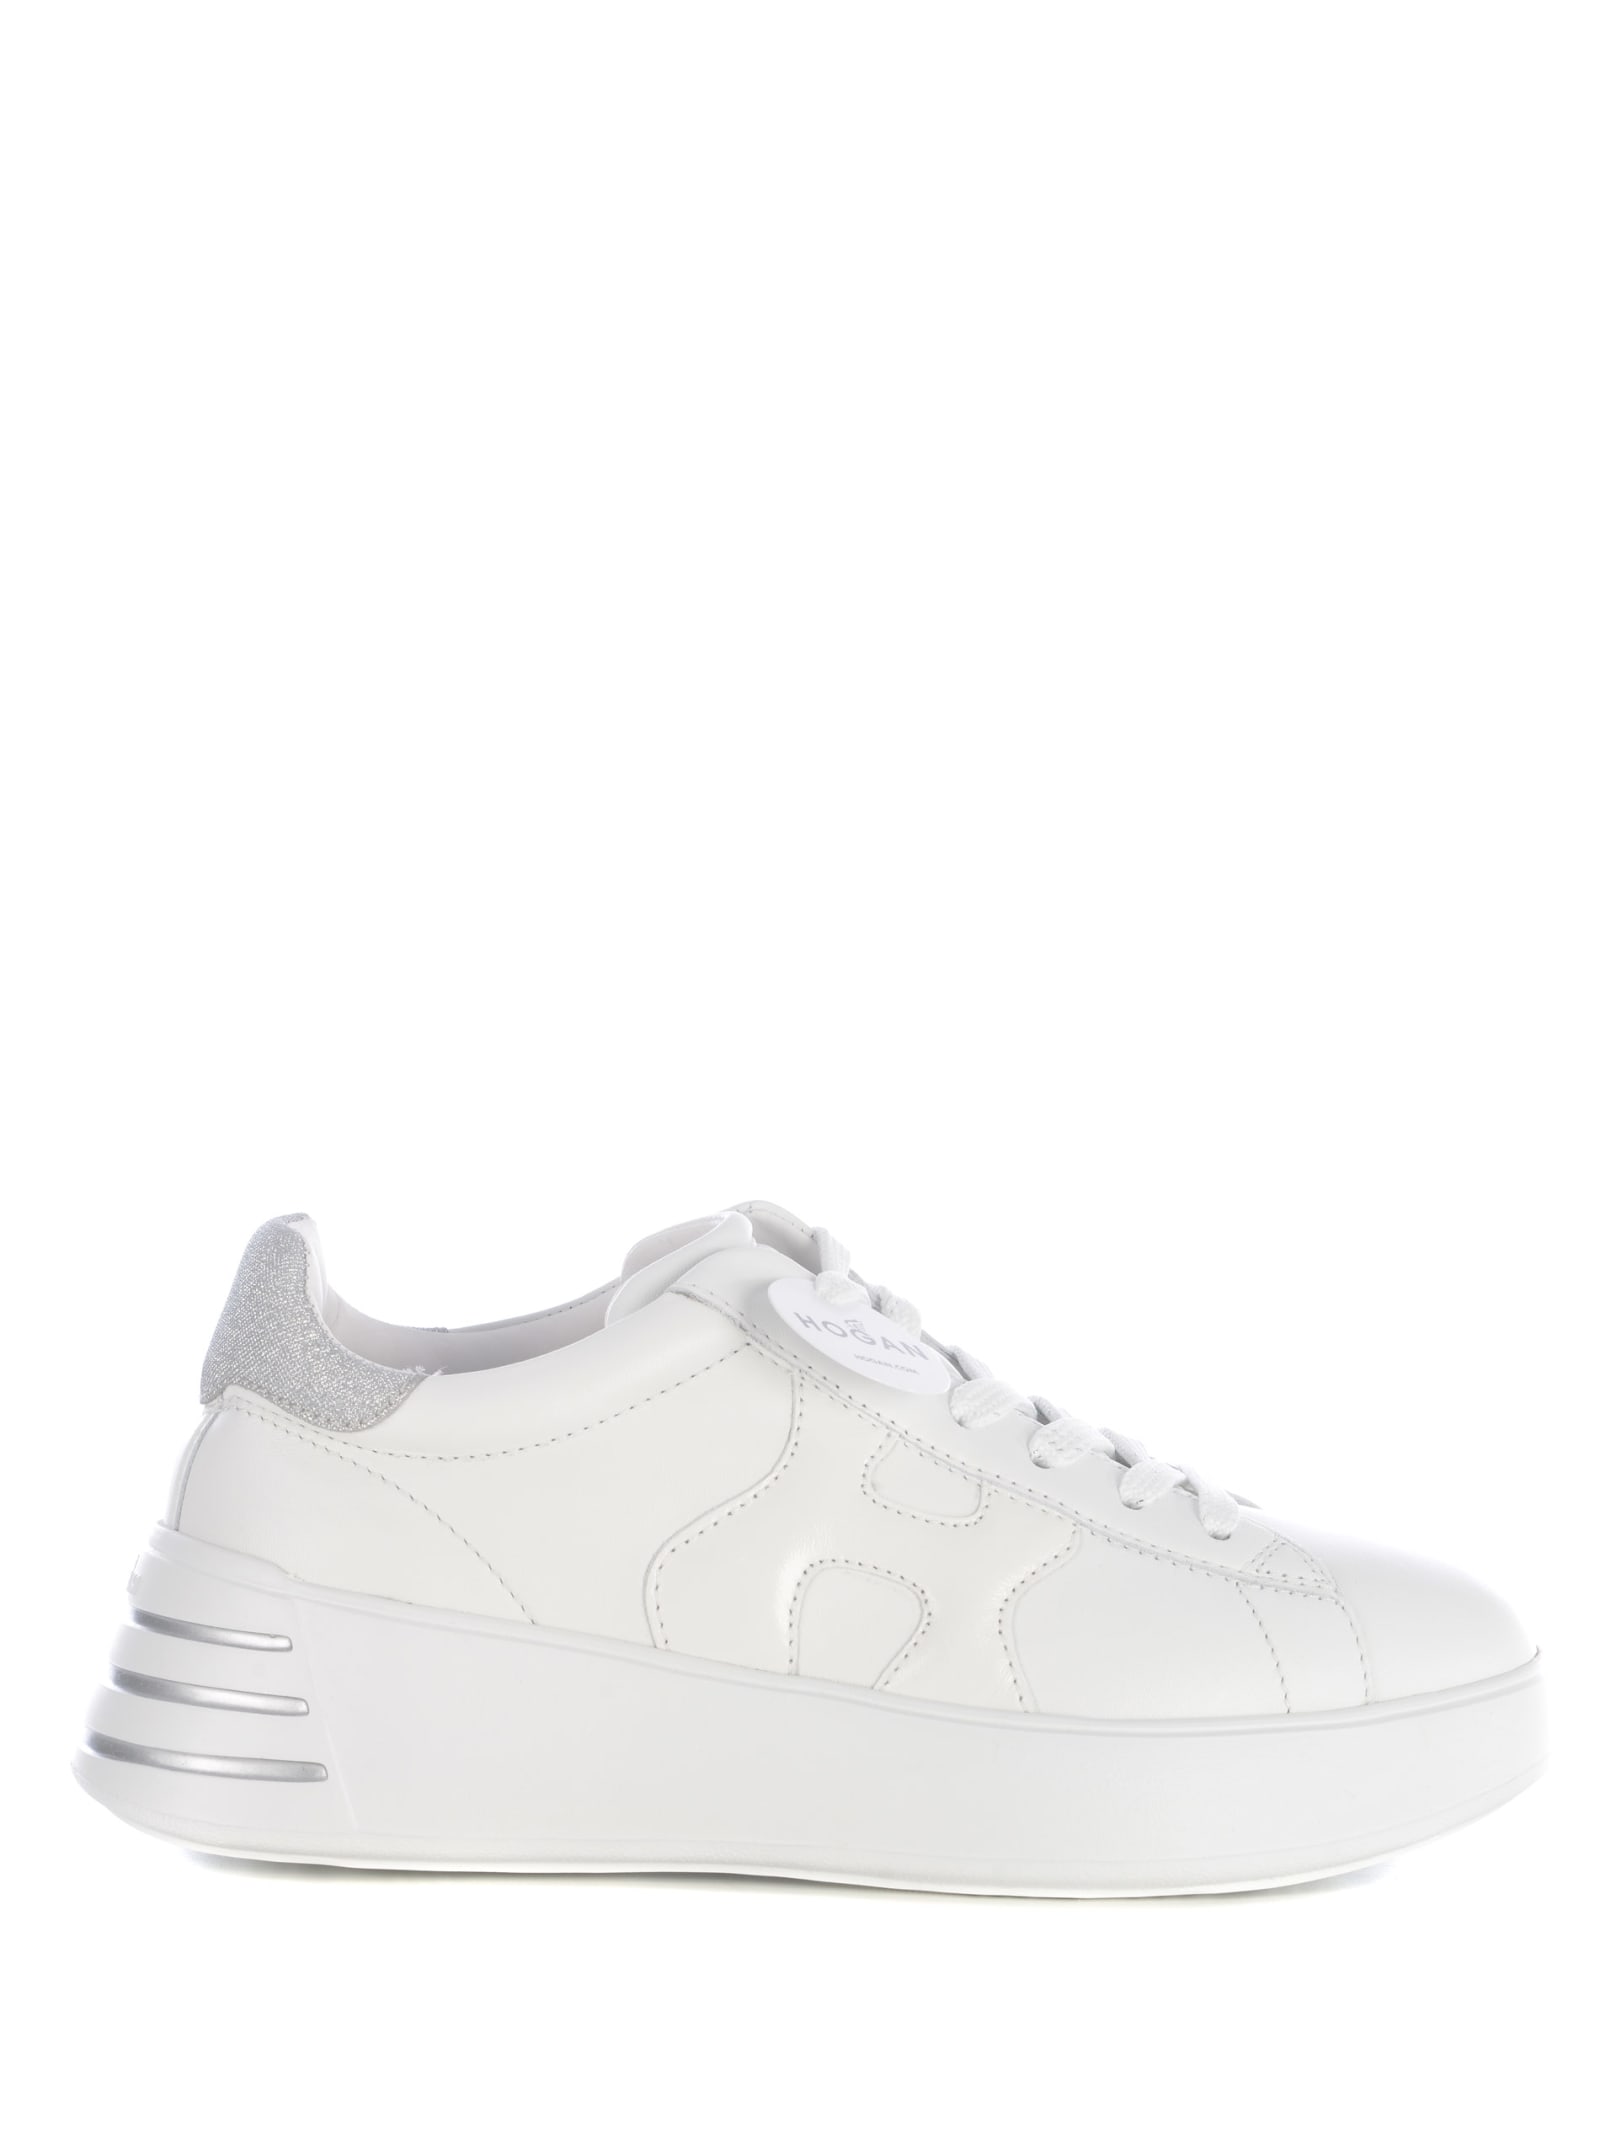 Hogan Sneakers  Rebel Made Of Leather In White